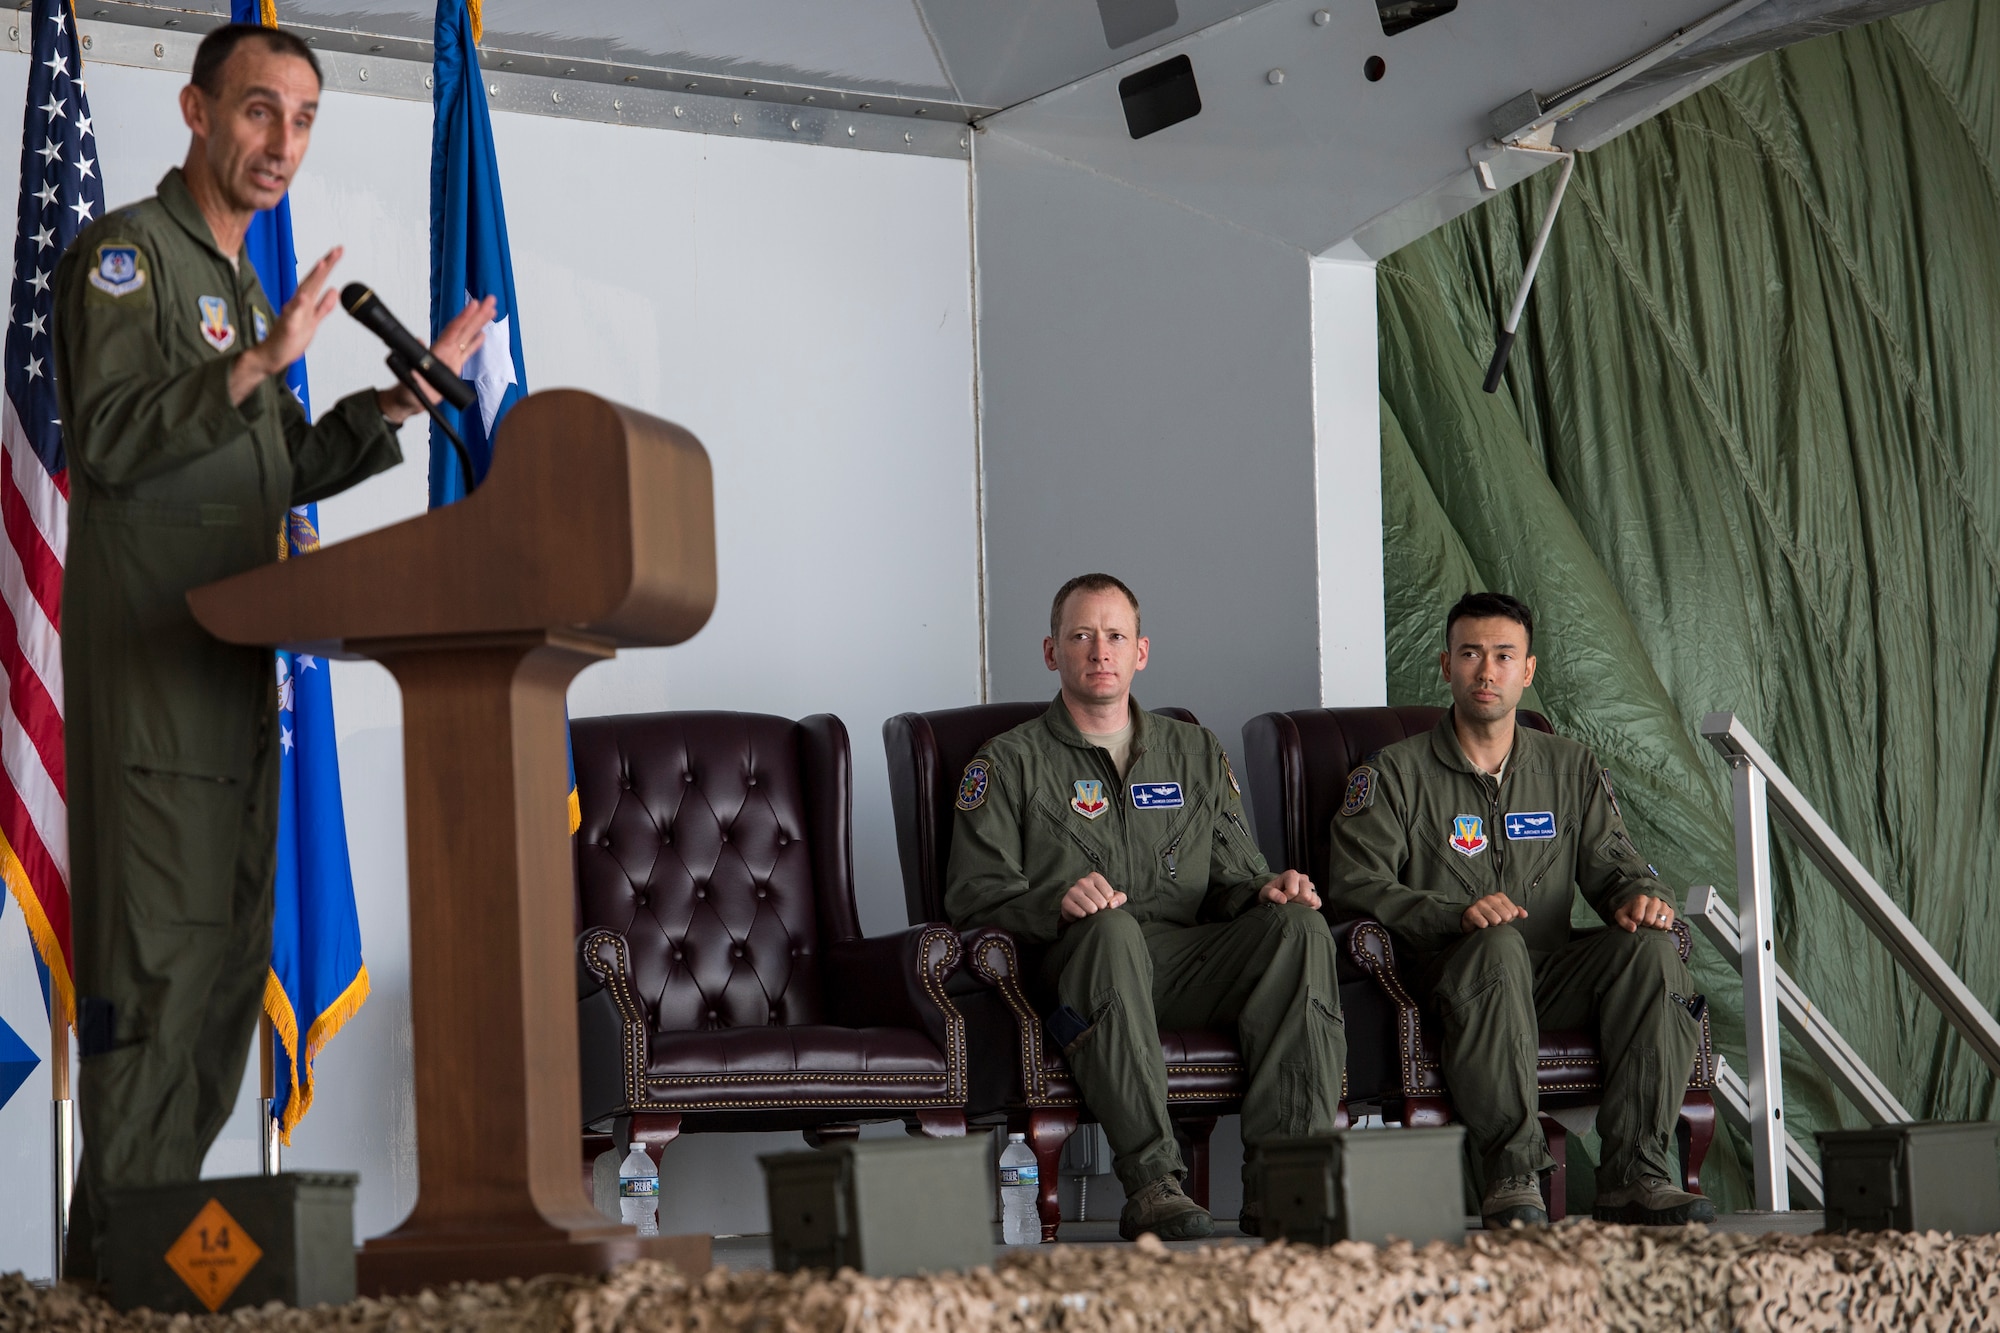 U.S. Air Force Maj. Gen. Scott J. Zobrist, left, 9th Air Force commander, speaks during an award ceremony, May 23, 2018, at Moody Air Force Base, Ga. The ceremony was held to honor Maj. Matthew “Chowder” Cichowski, center, and Capt. William “Archer” Dana, 74th Fighter Squadron A-10 Thunderbolt II pilots, who each received a Distinguished Flying Cross.  The Distinguished Flying Cross is awarded to any officer or enlisted member of the U.S. Armed Forces who distinguishes themselves in support of operations by heroism or extraordinary achievement while participating in aerial flight. (U.S. Air Force photo by Senior Airman Janiqua P. Robinson)